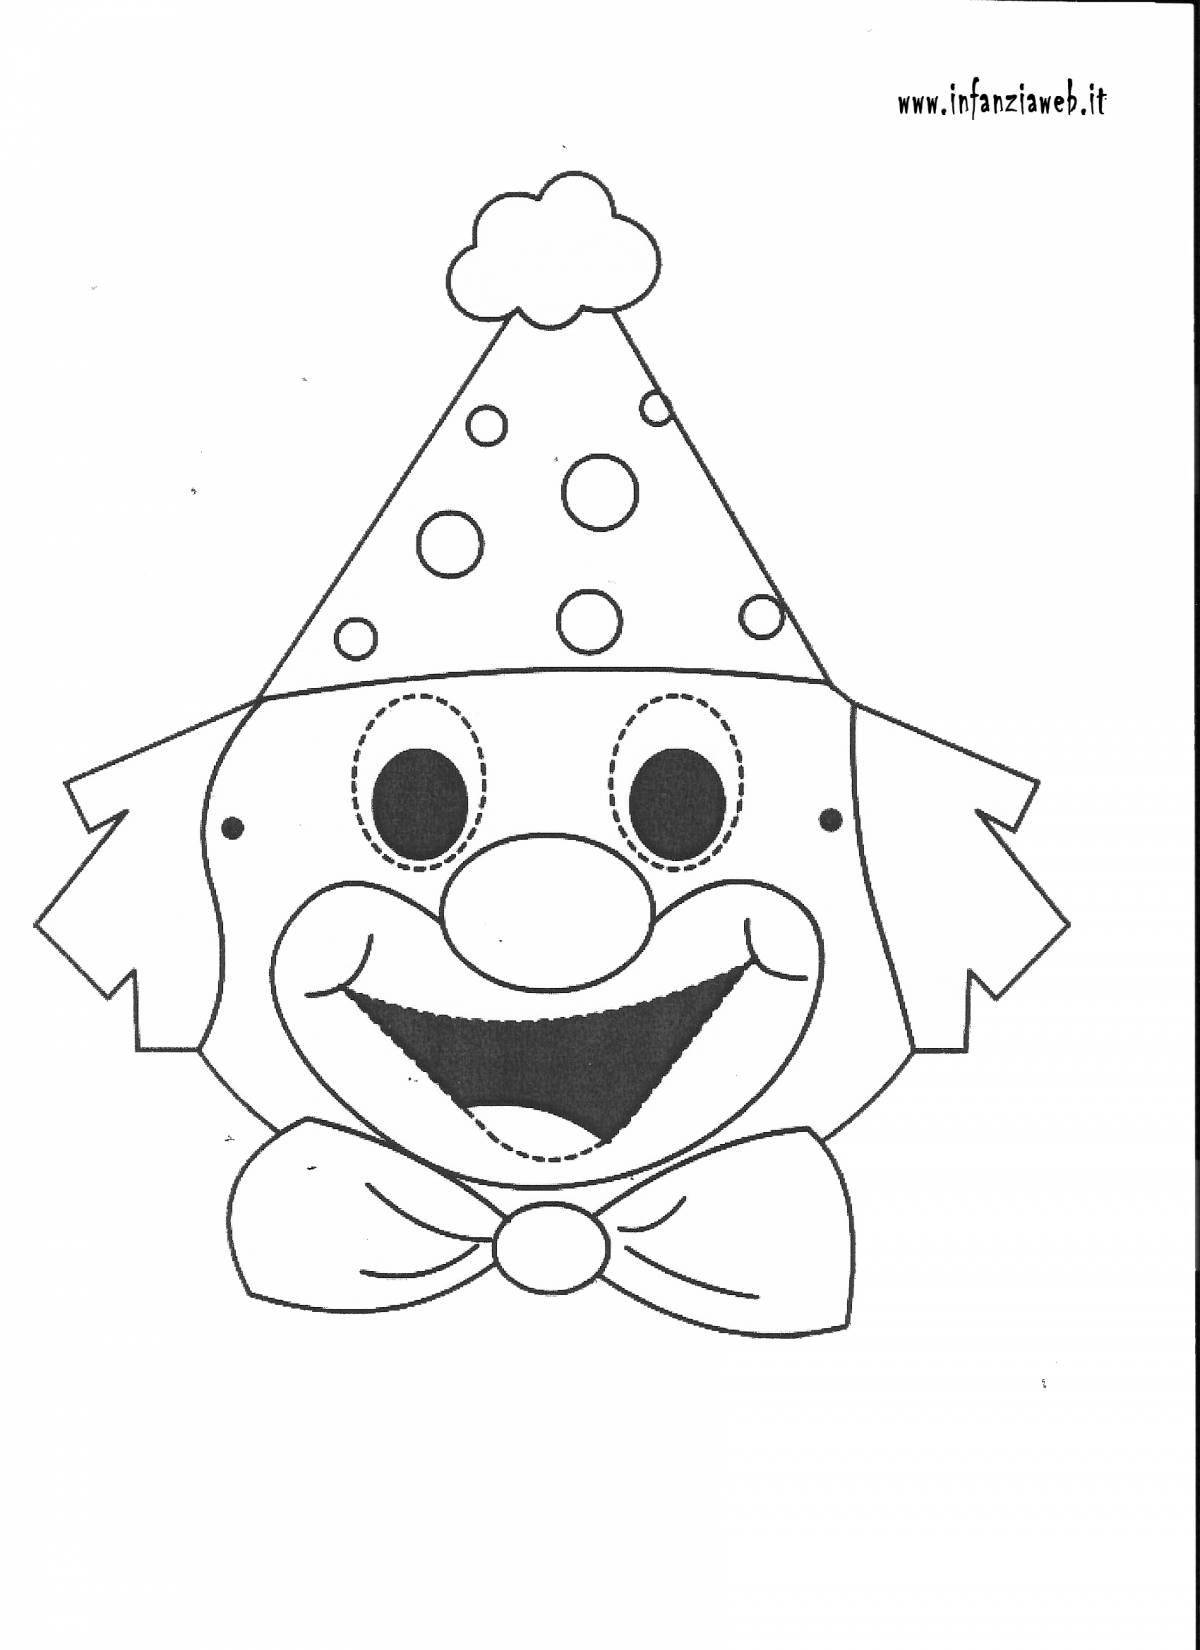 Colored glowing clown head coloring book